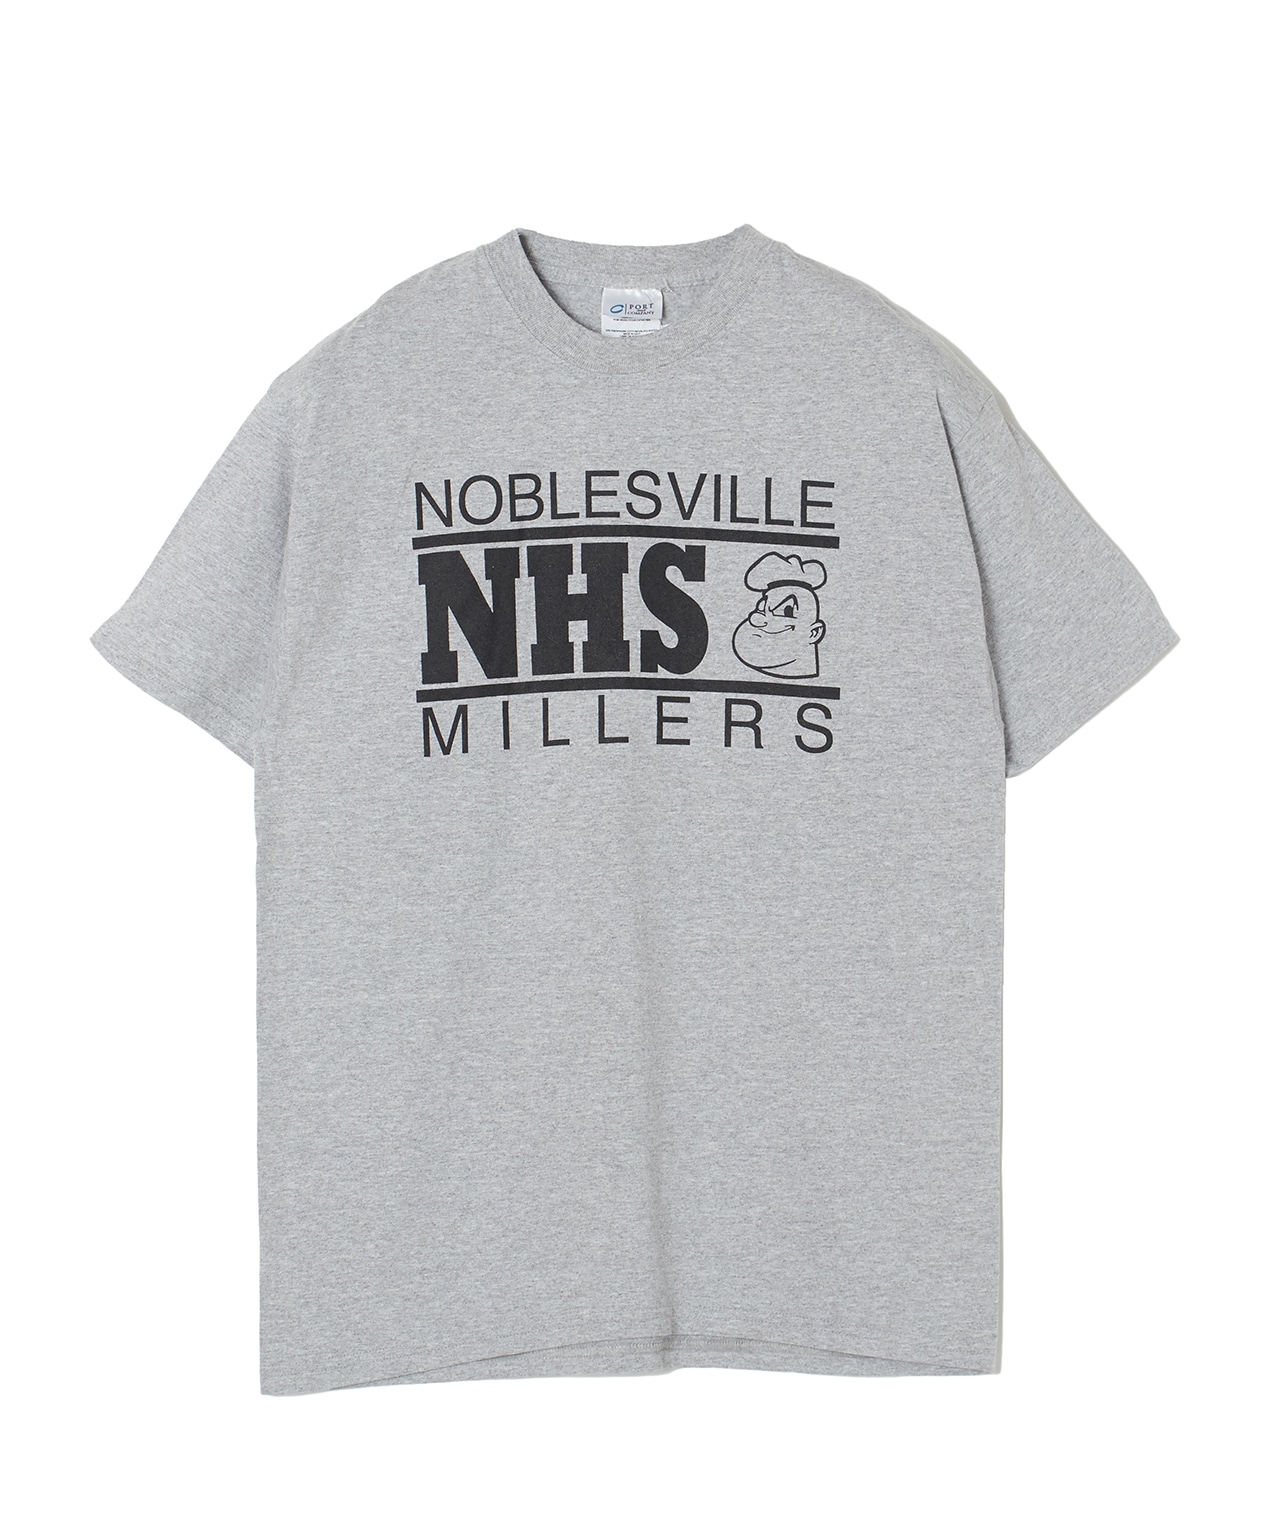 USED/NOBLES VILLE NHS MILLERS/プリントTシャツ 詳細画像 グレー 1